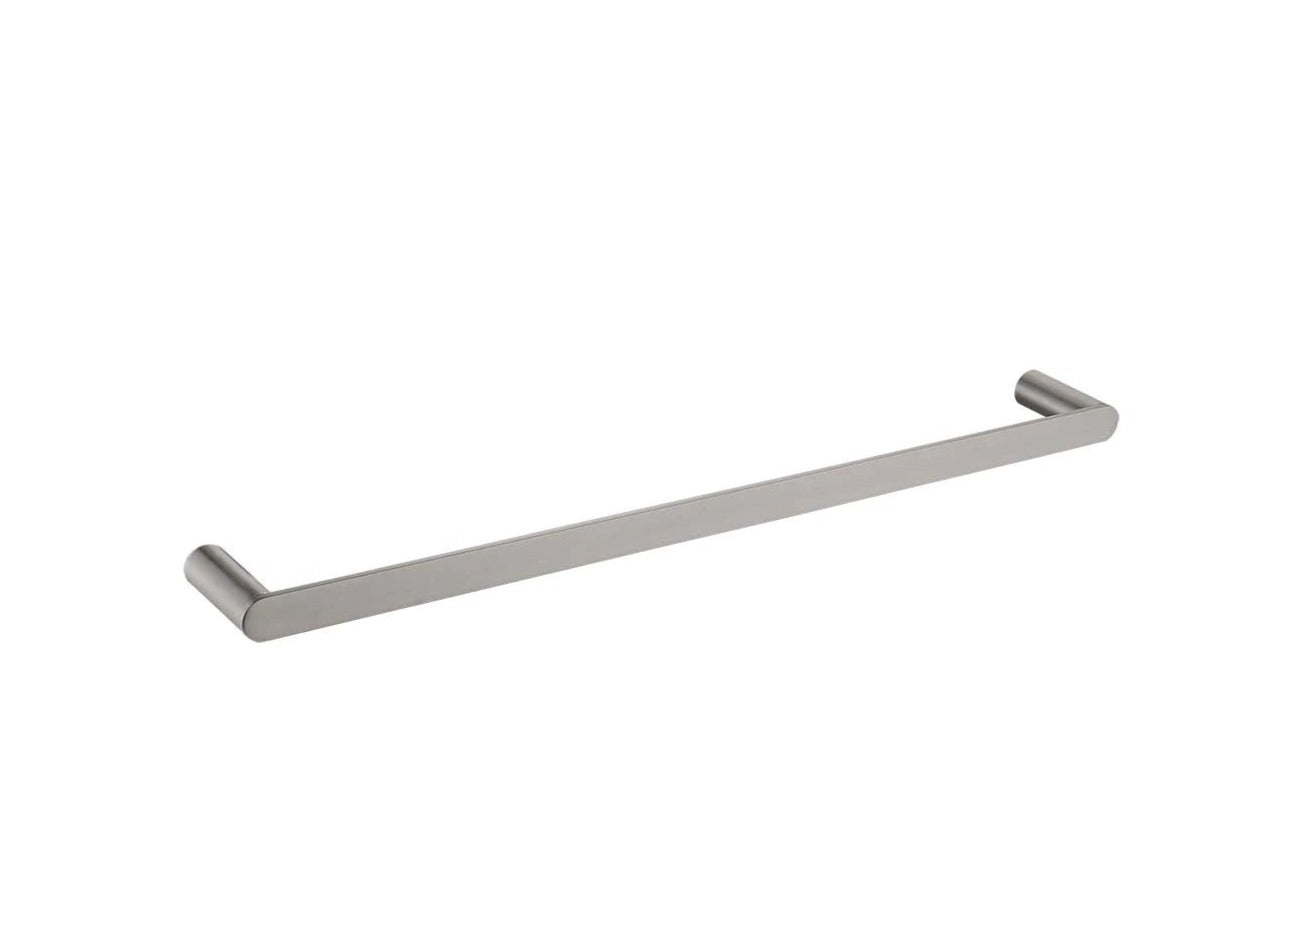 TAPART SLEEK SINGLE NON-HEATED TOWEL RAIL BRUSHED NICKEL 600MM AND 800MM